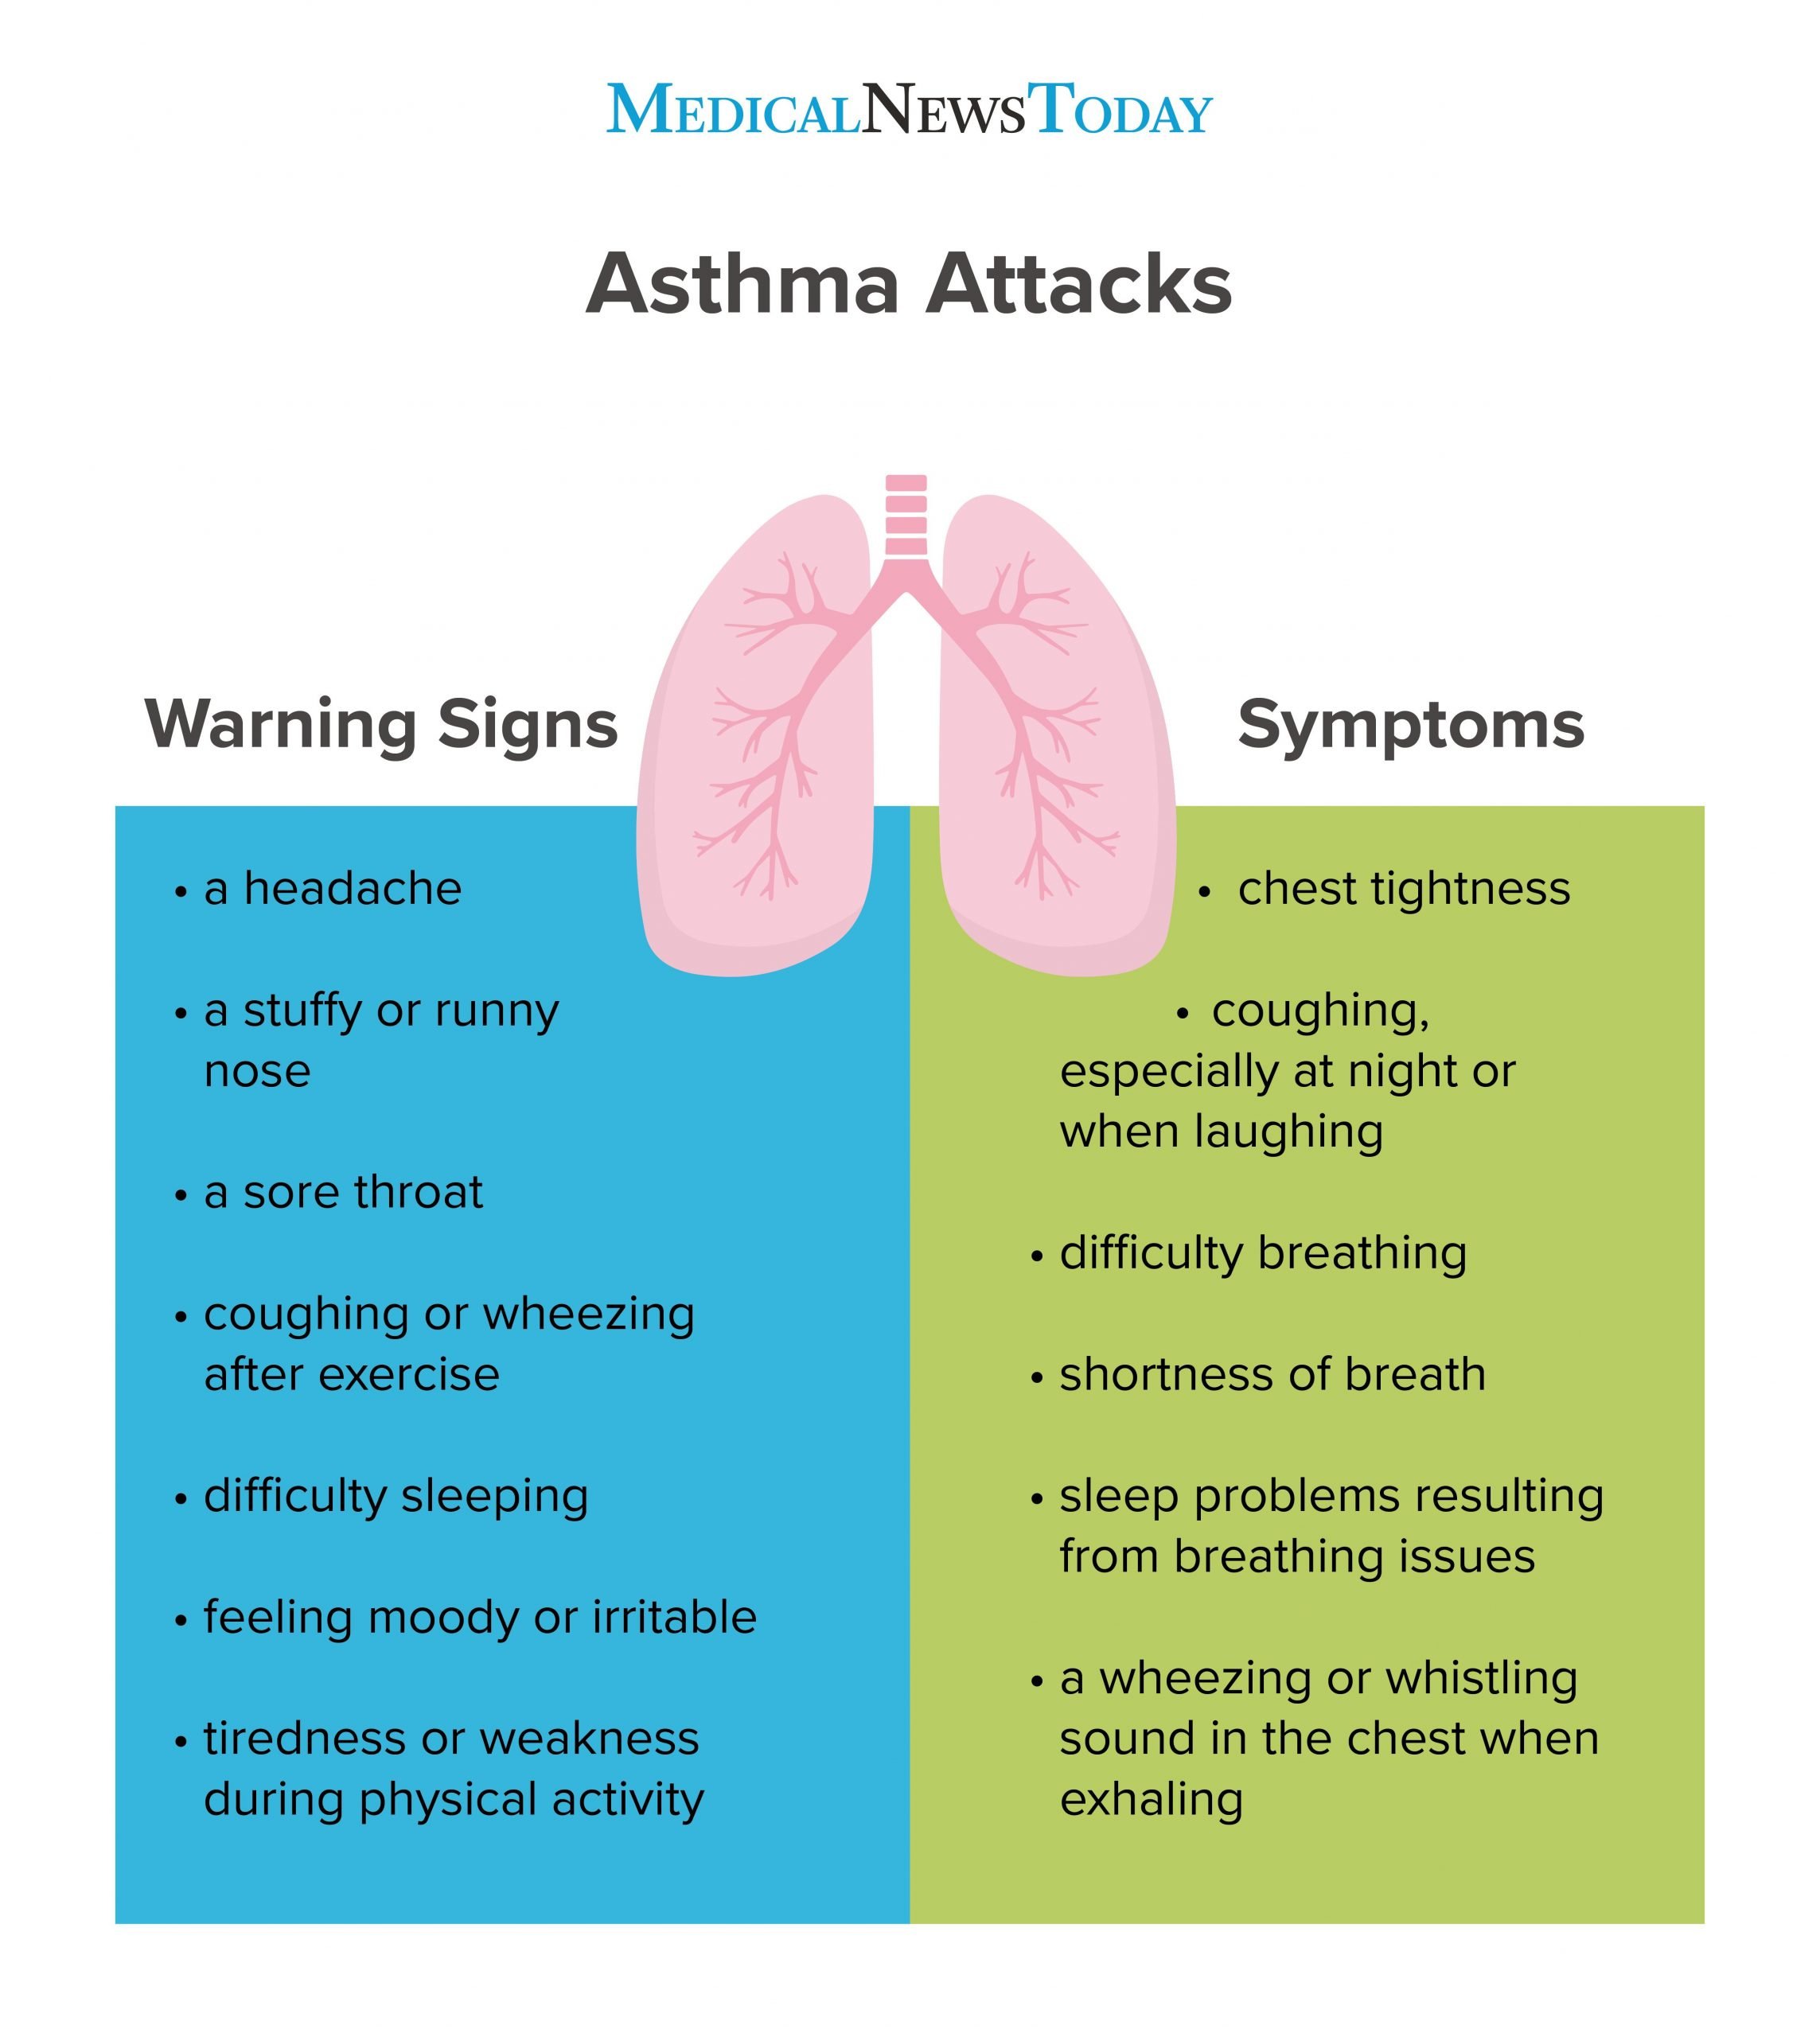 By the way, medical professional: Does asthma disappear?